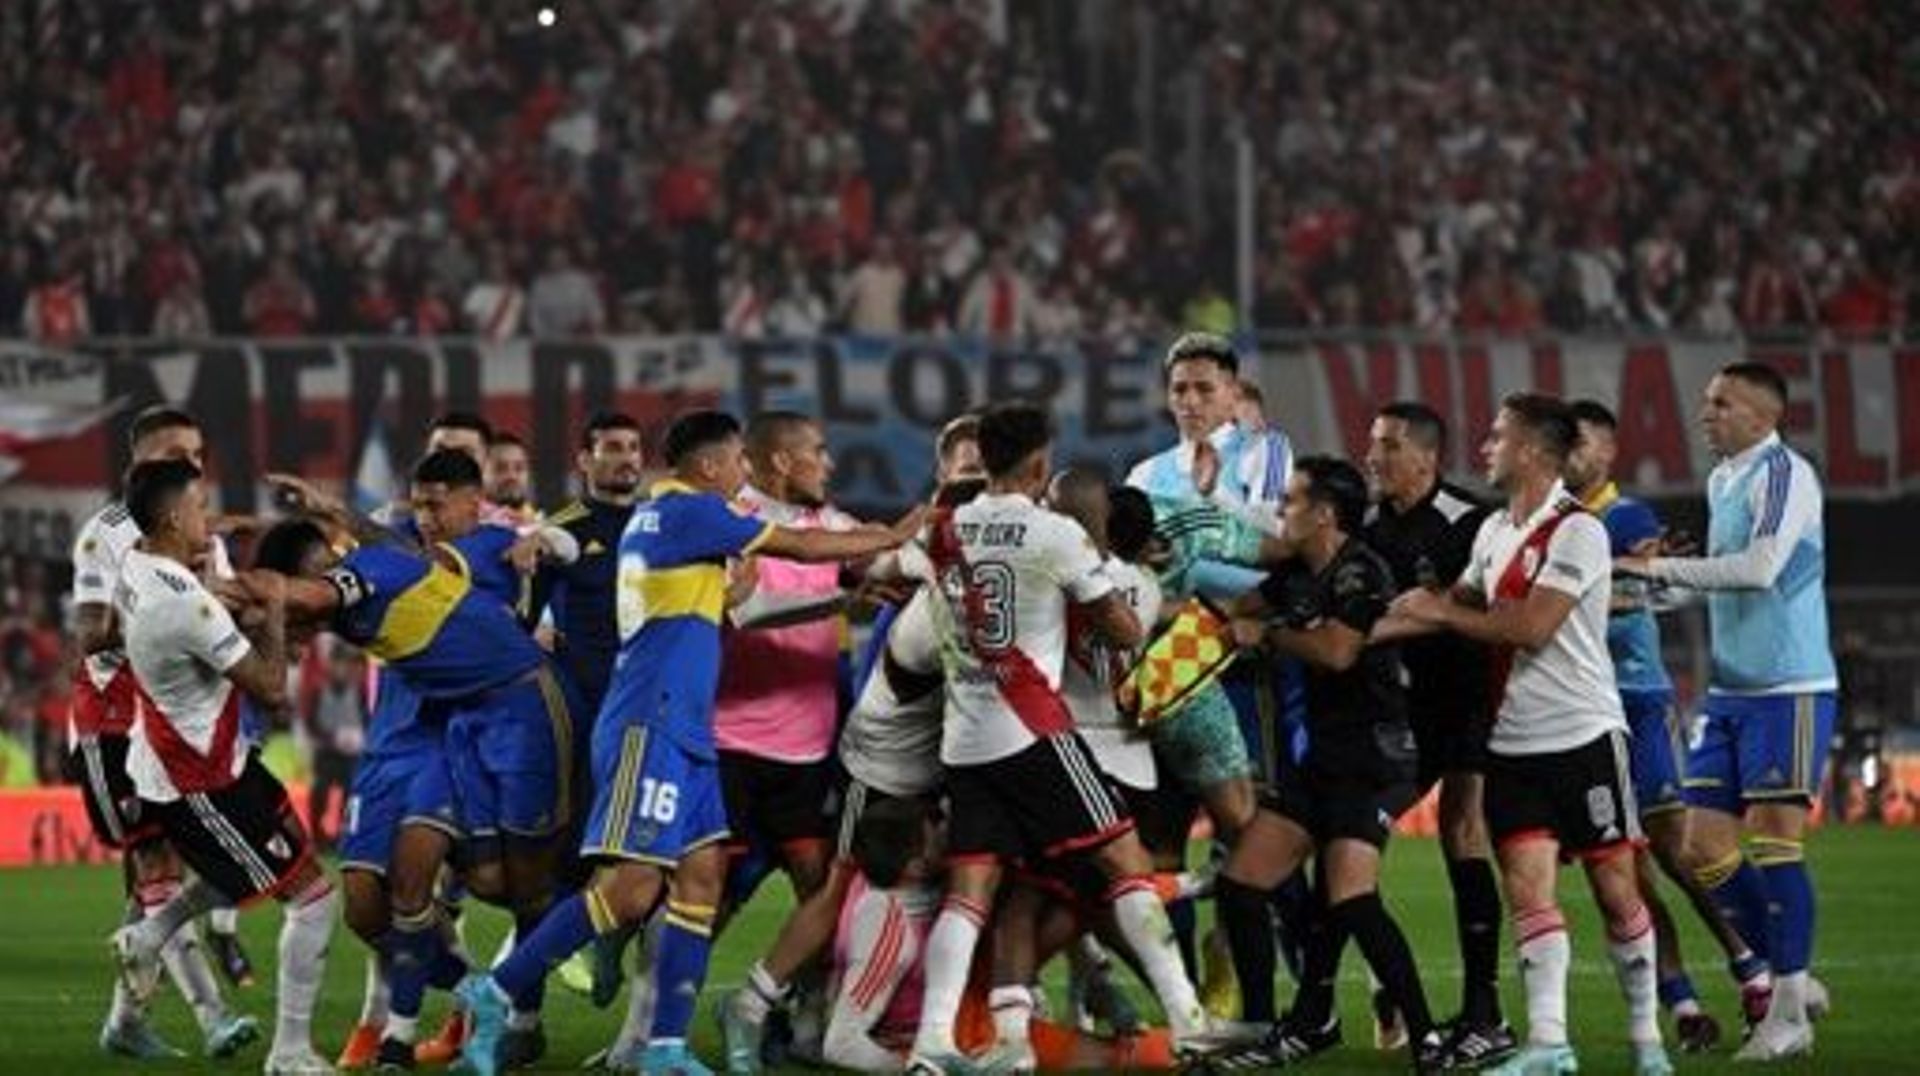 Players of both teams scuffle after incidents following River Plate's penalty goal during the Argentine Professional Football League Tournament 2023 match between River Plate and Boca Juniors at El Monumental stadium in Buenos Aires on May 7, 2023.  Luis 